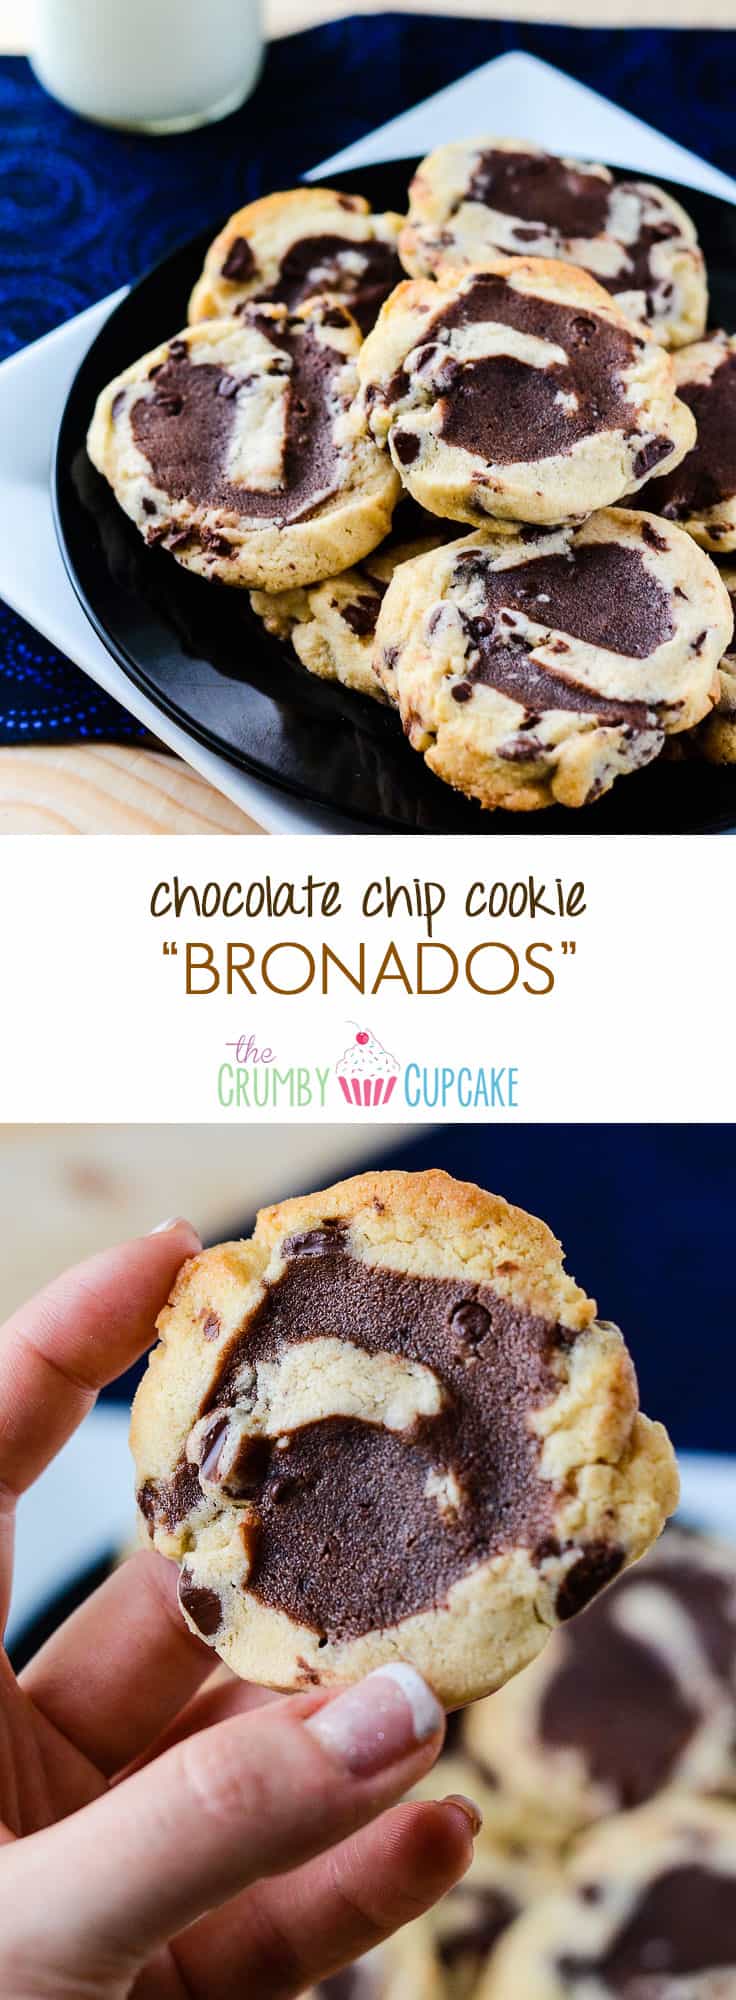 Chocolate Chip Cookie Bronados | A sturdy, cut-out style chocolate chip cookie, filled with brownie batter, rolled, sliced, and baked to brookie-like perfection.